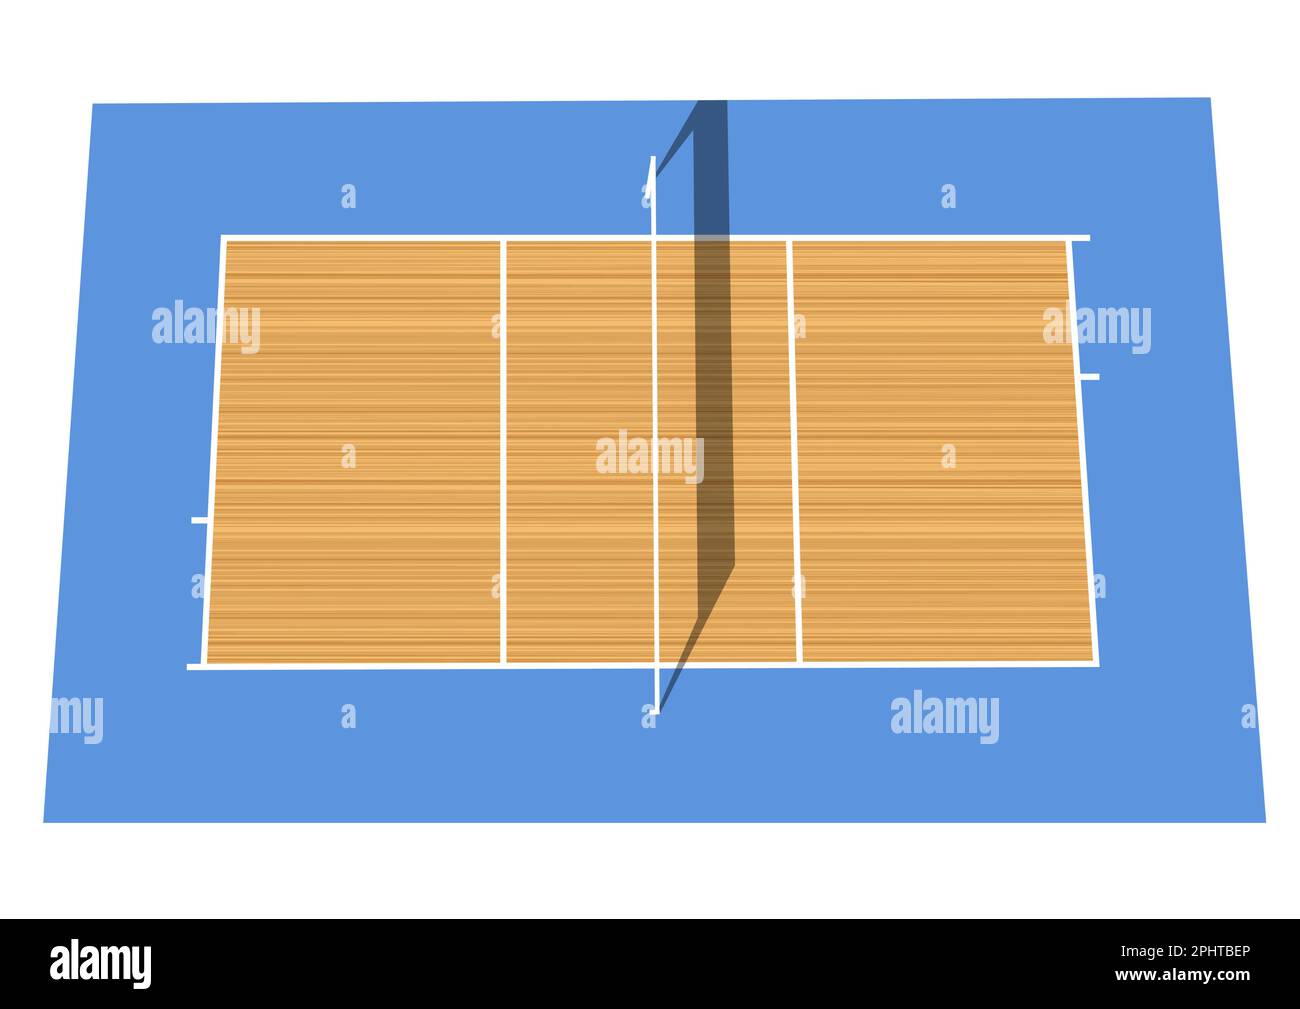 Volleyball Court vector illustration isolated on white background Stock Vector